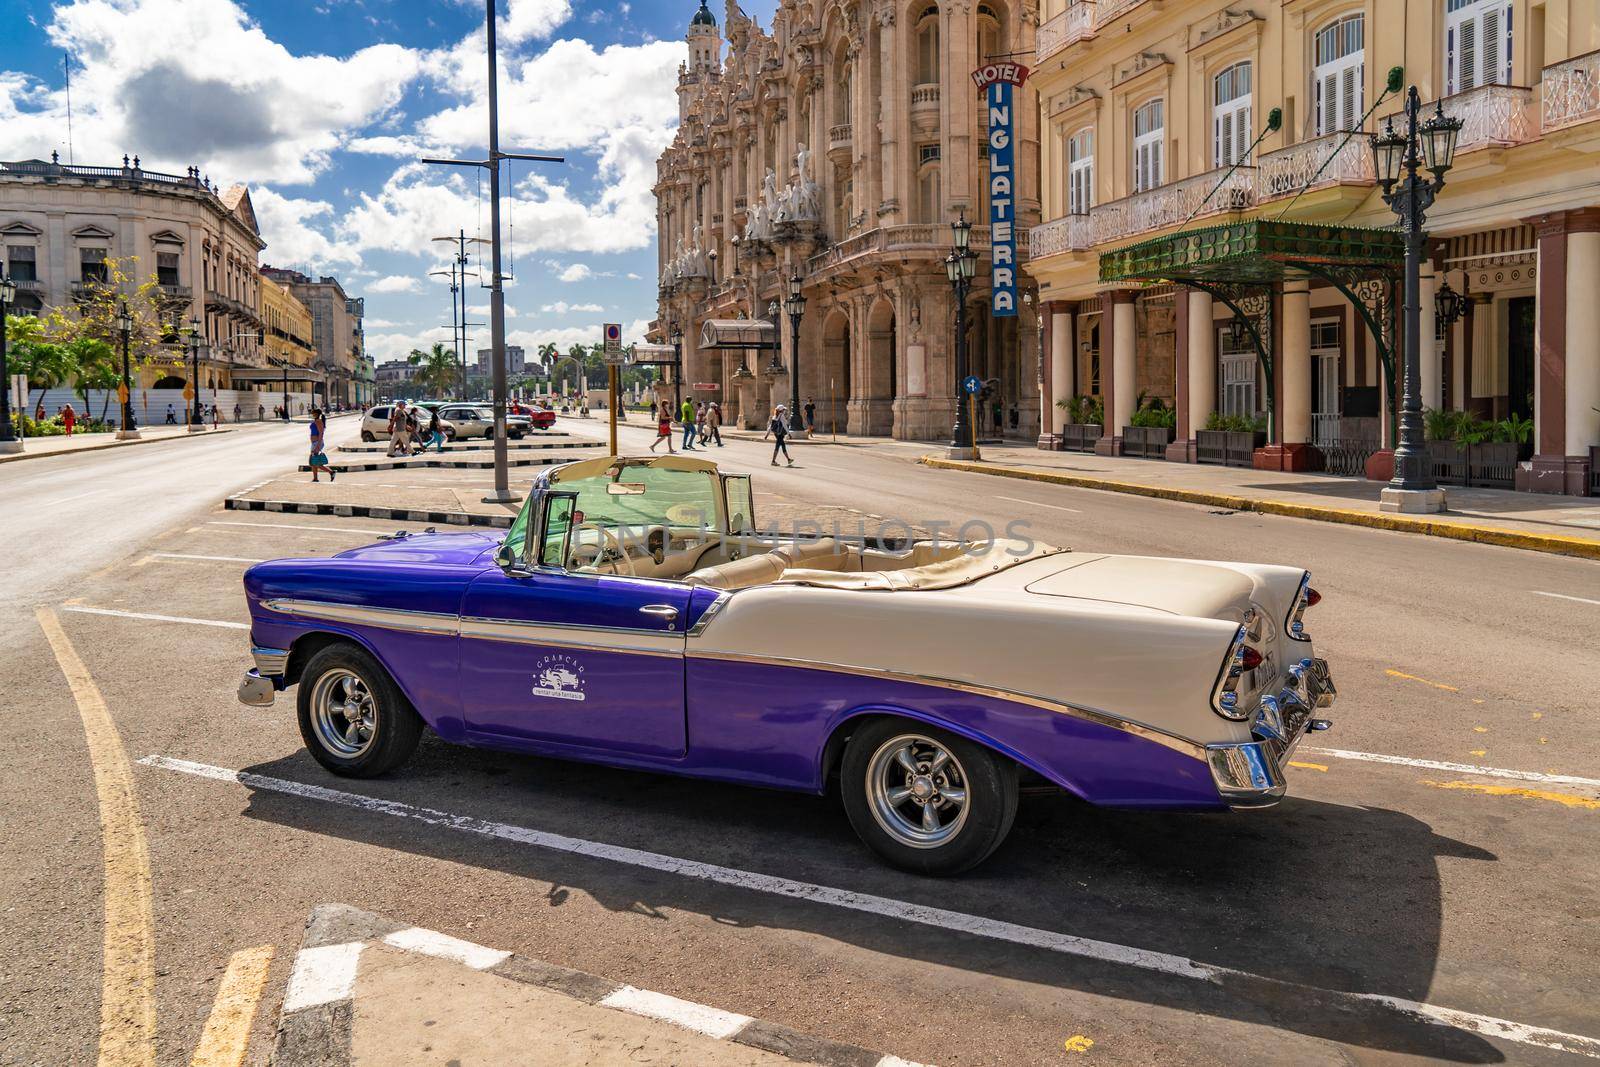 Havana Cuba. November 25, 2020: Old car from the Gran Car agency parked on an avenue in Havana with the Inglaterra hotel and the Gran Teatro de la Habana in the background